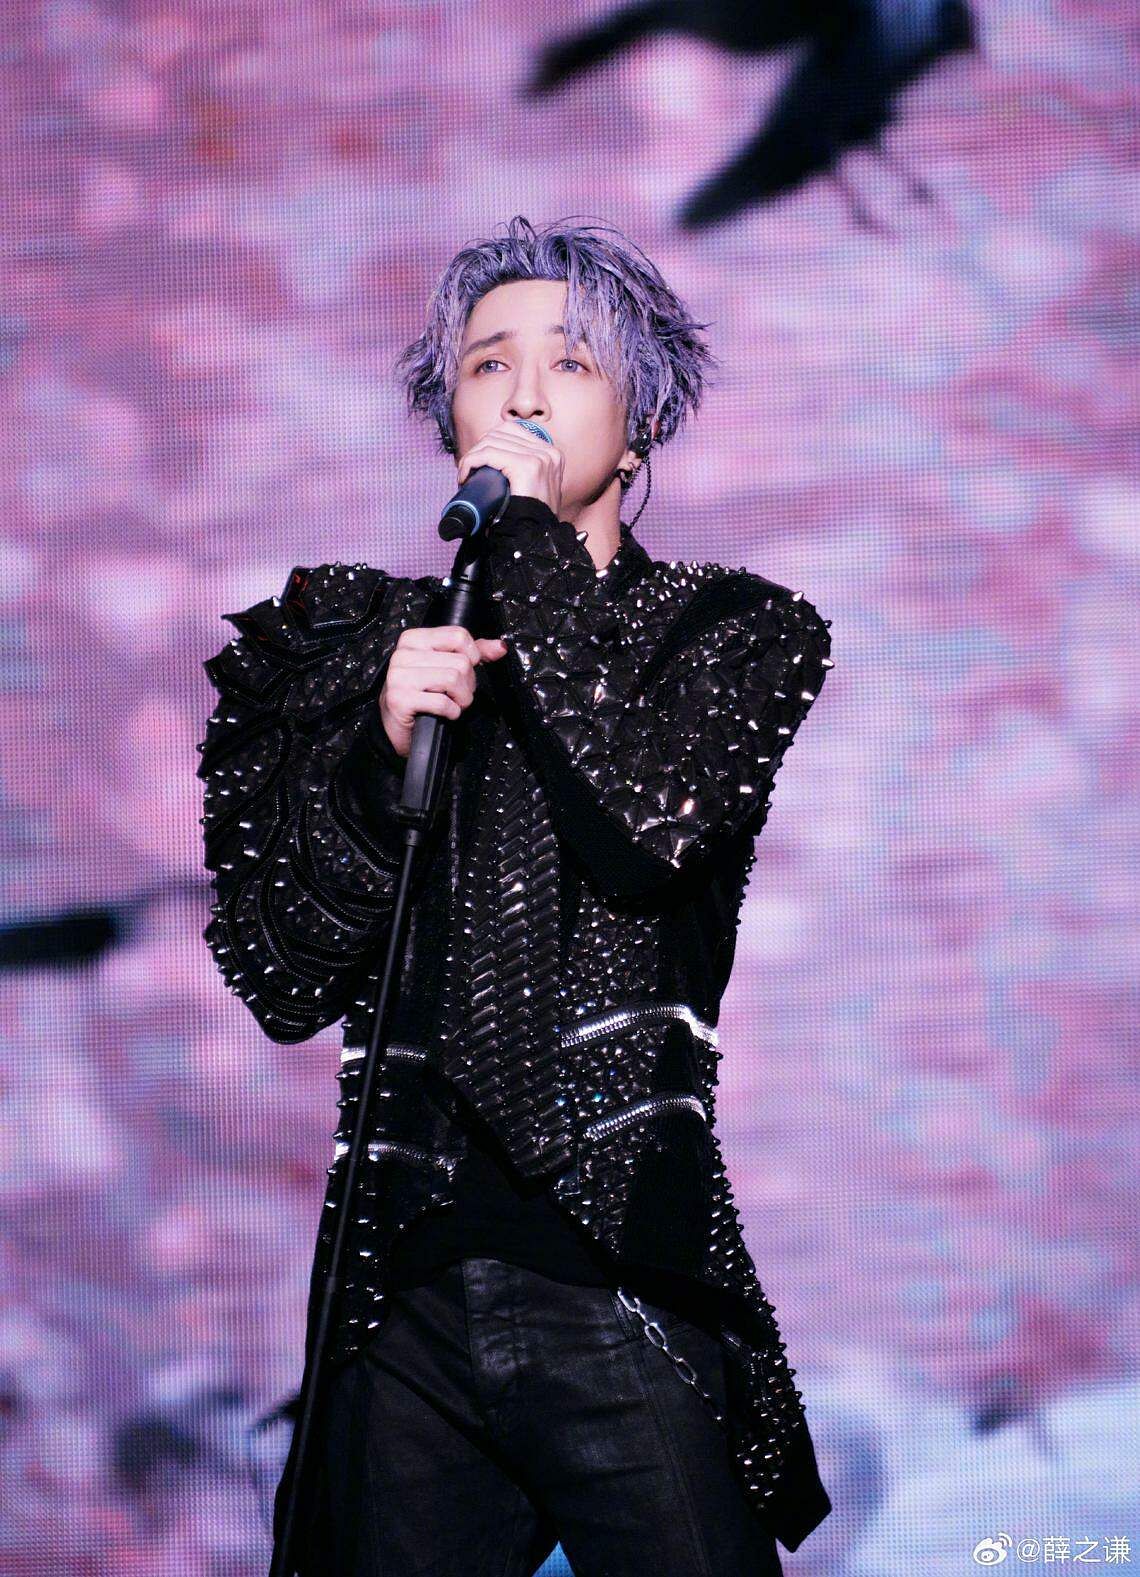 The 5 ‘Jewels’ of Mandopop: China’s Joker Xue is the newly minted gem ...